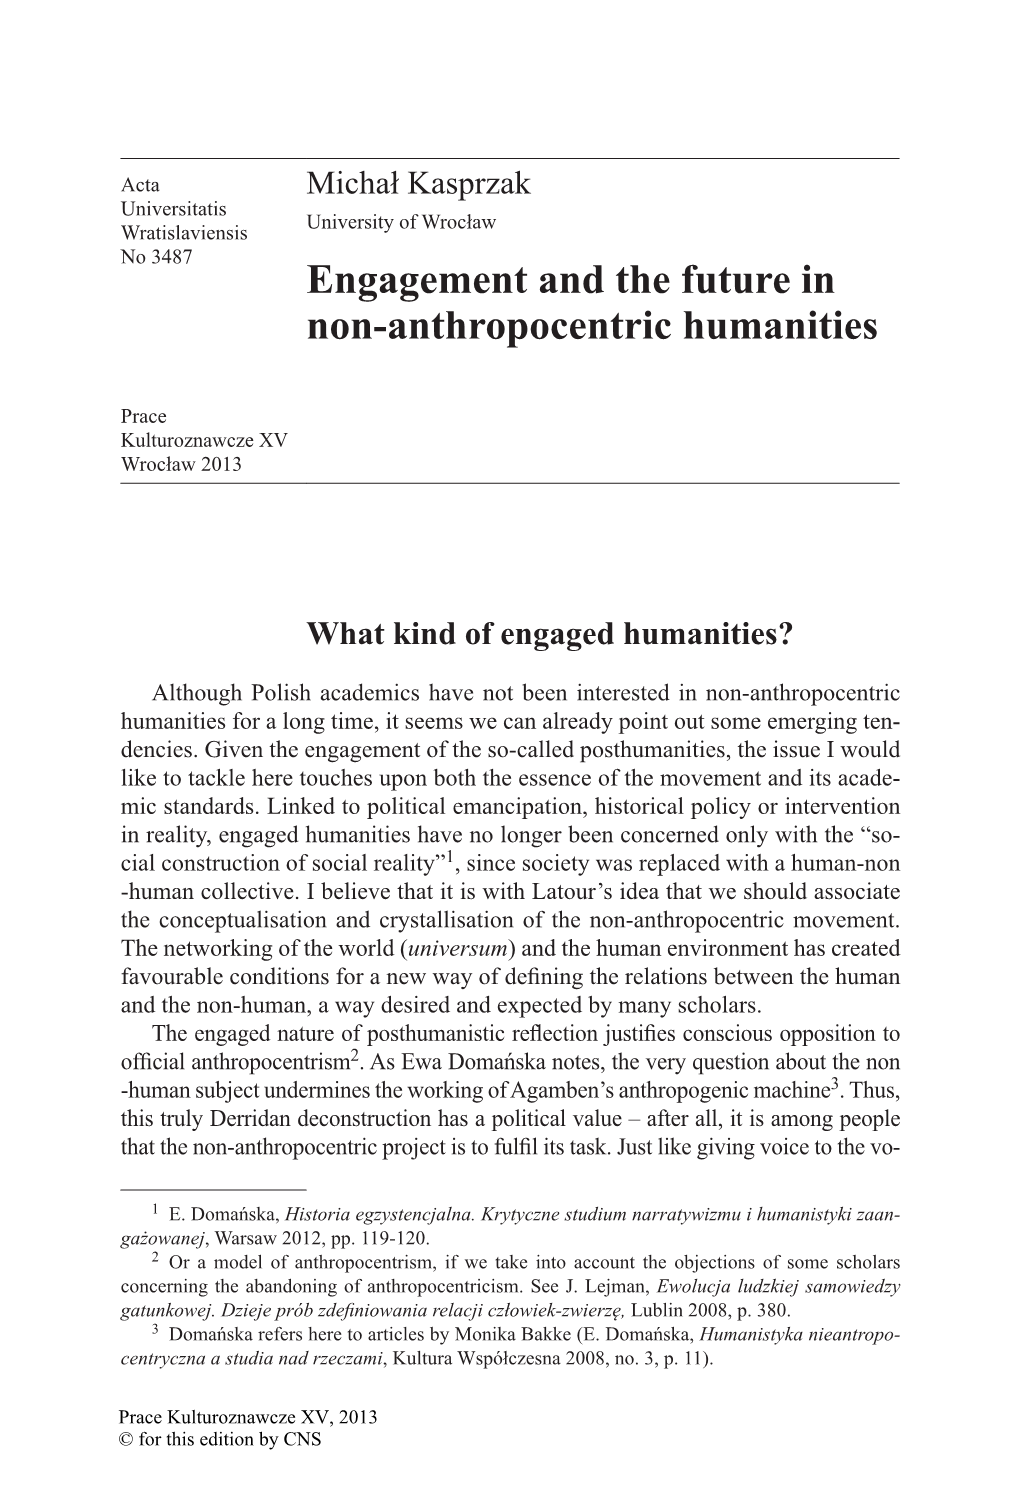 Engagement and the Future in Non-Anthropocentric Humanities